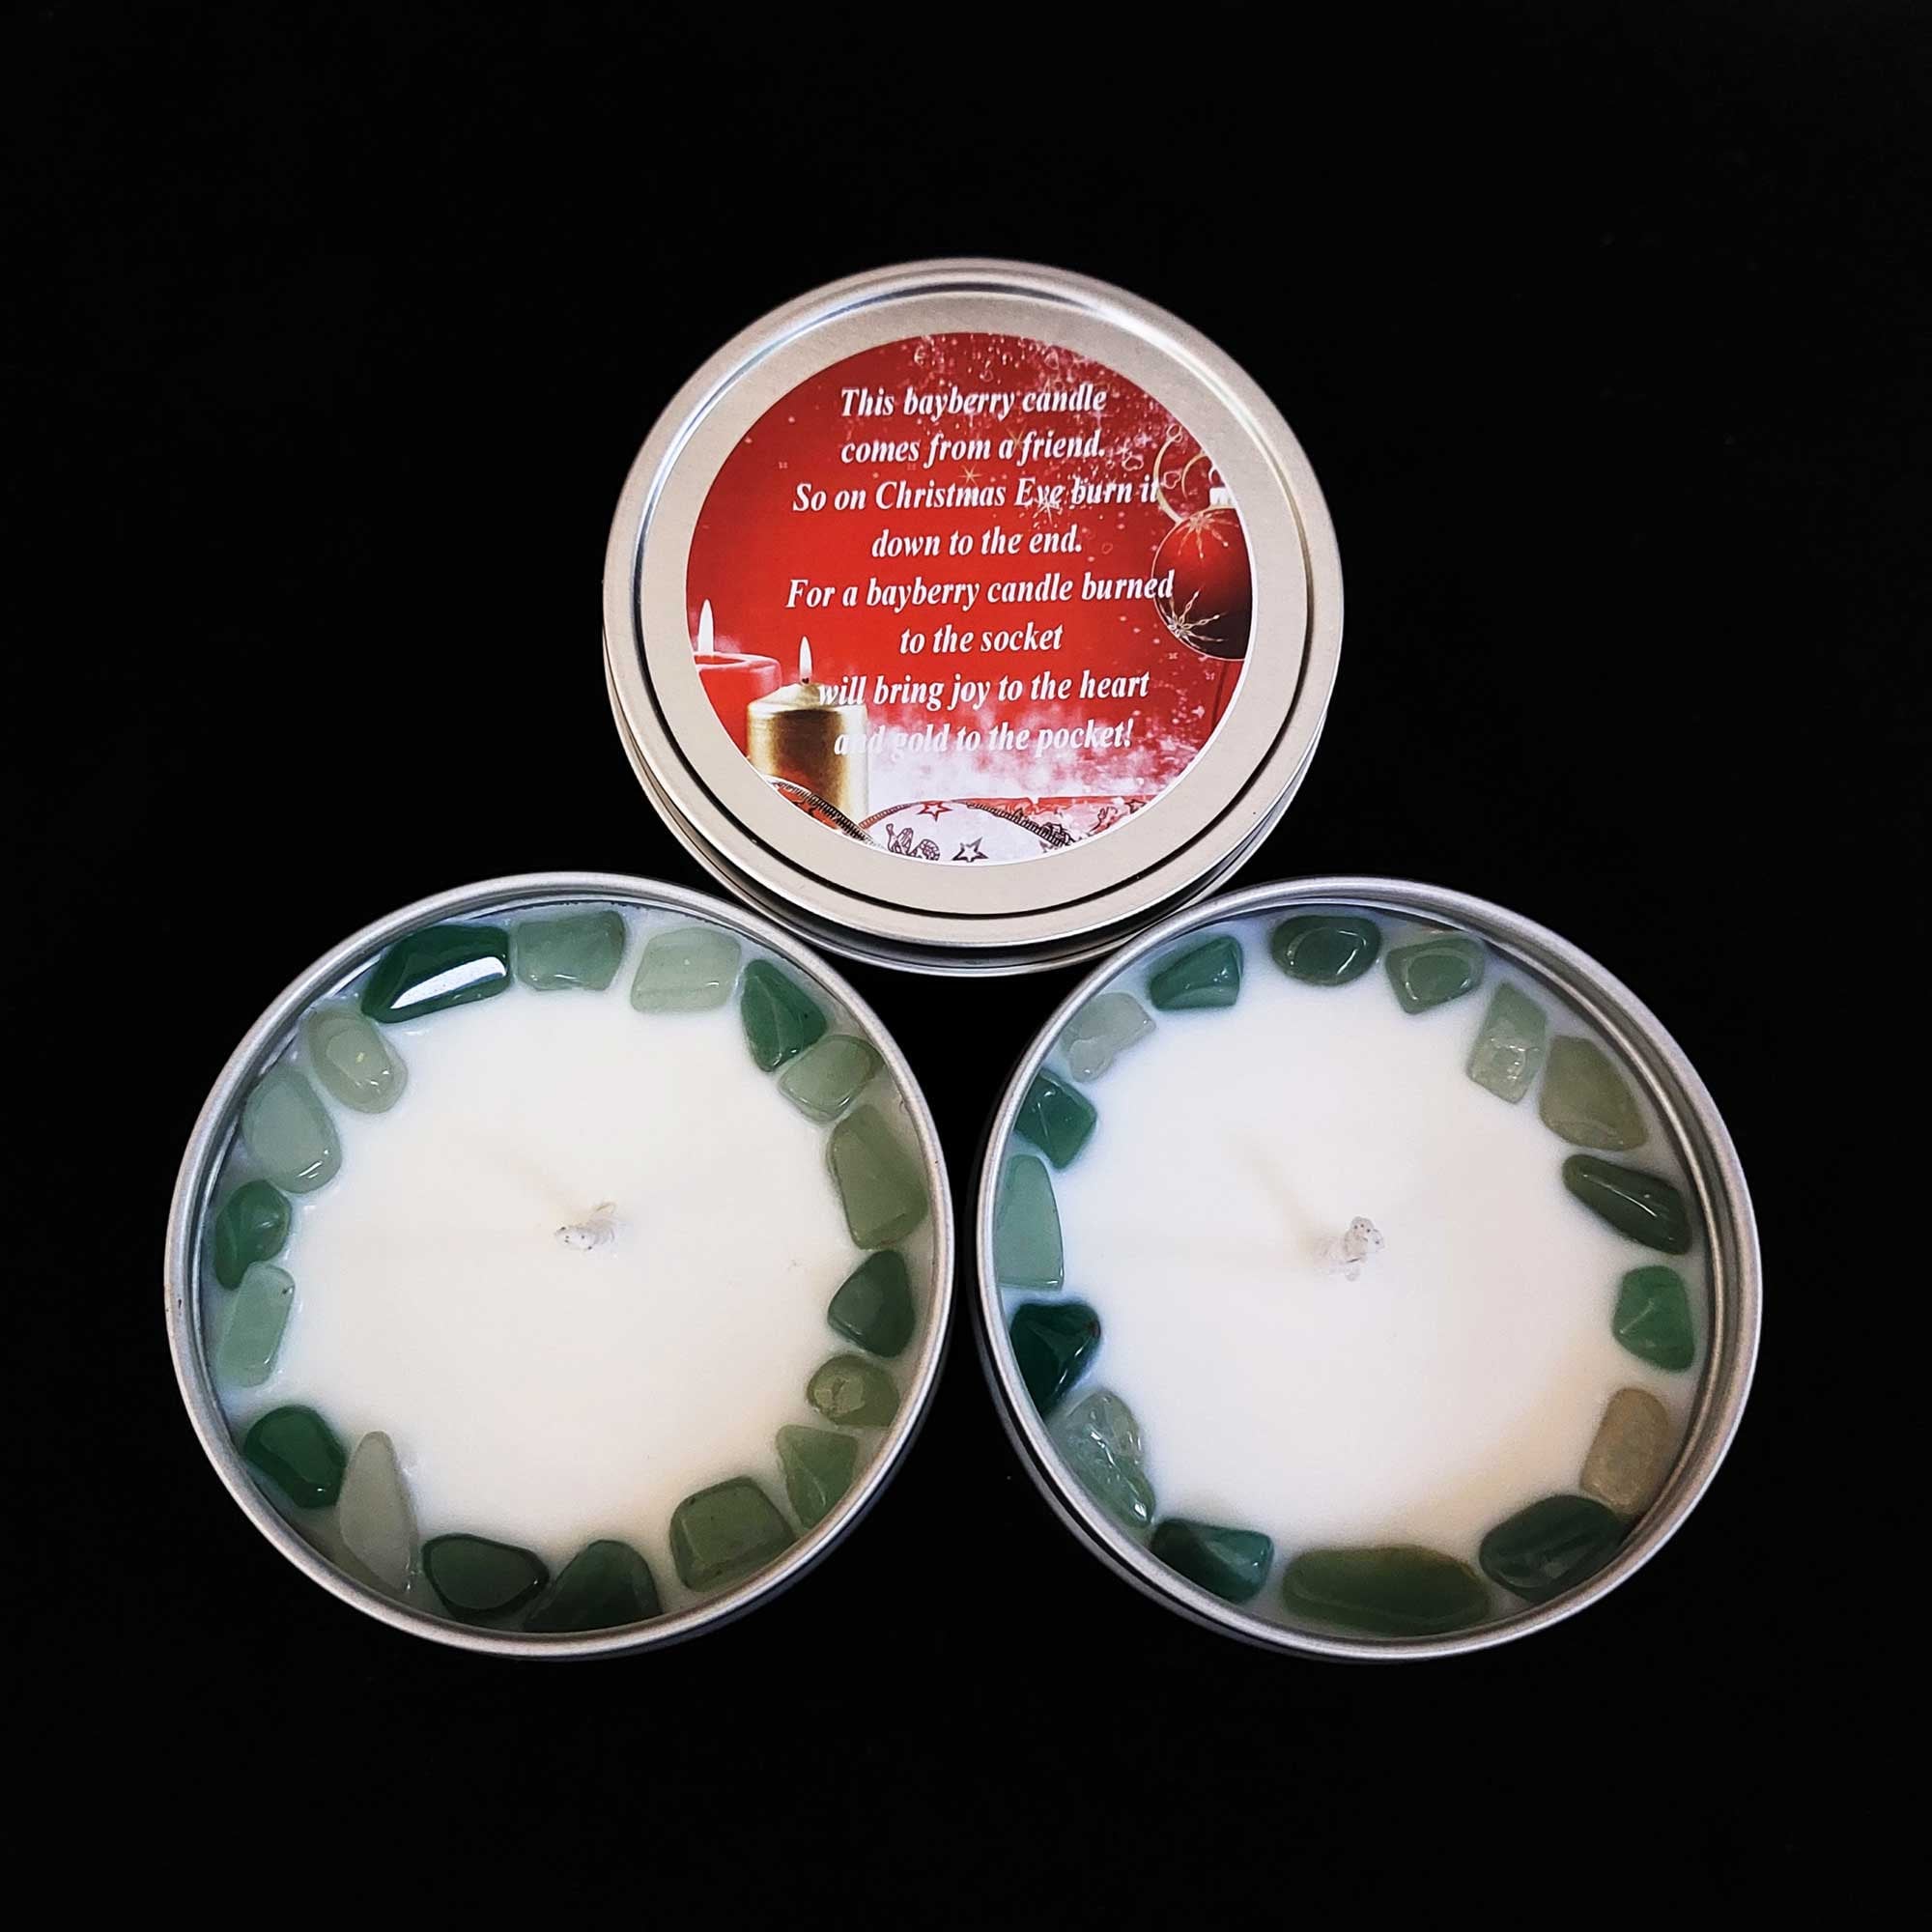 Bayberry Christmas Holiday Soy Candle in 8 oz Travel Tin Handmade by JenSan Home and Body 